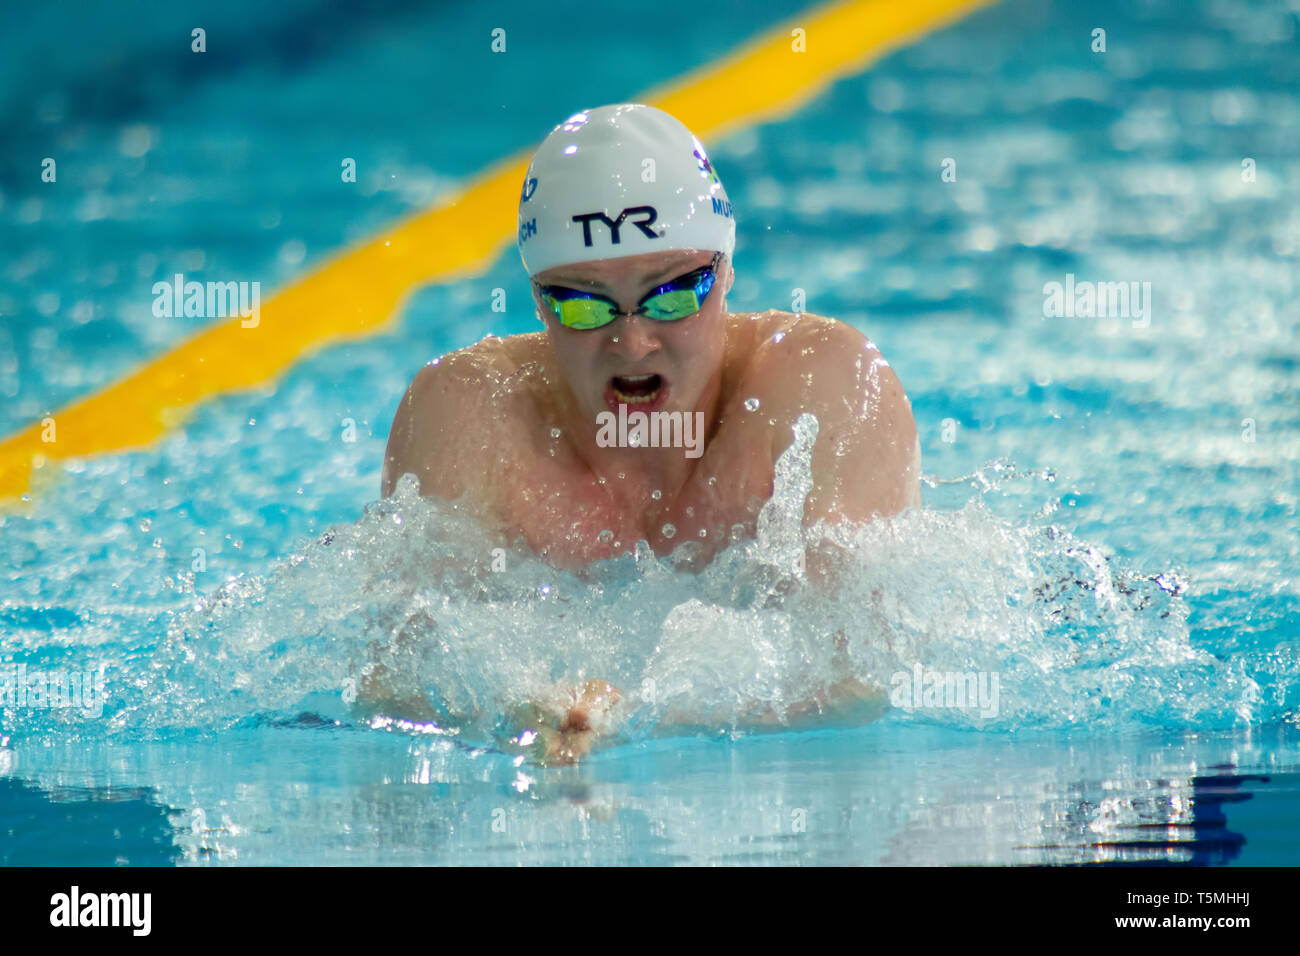 Ross Murdoch (University of Stirling) in action during the men's open 100 metres breaststroke final, during Day 1 of the 2019 British Swimming Champio Stock Photo